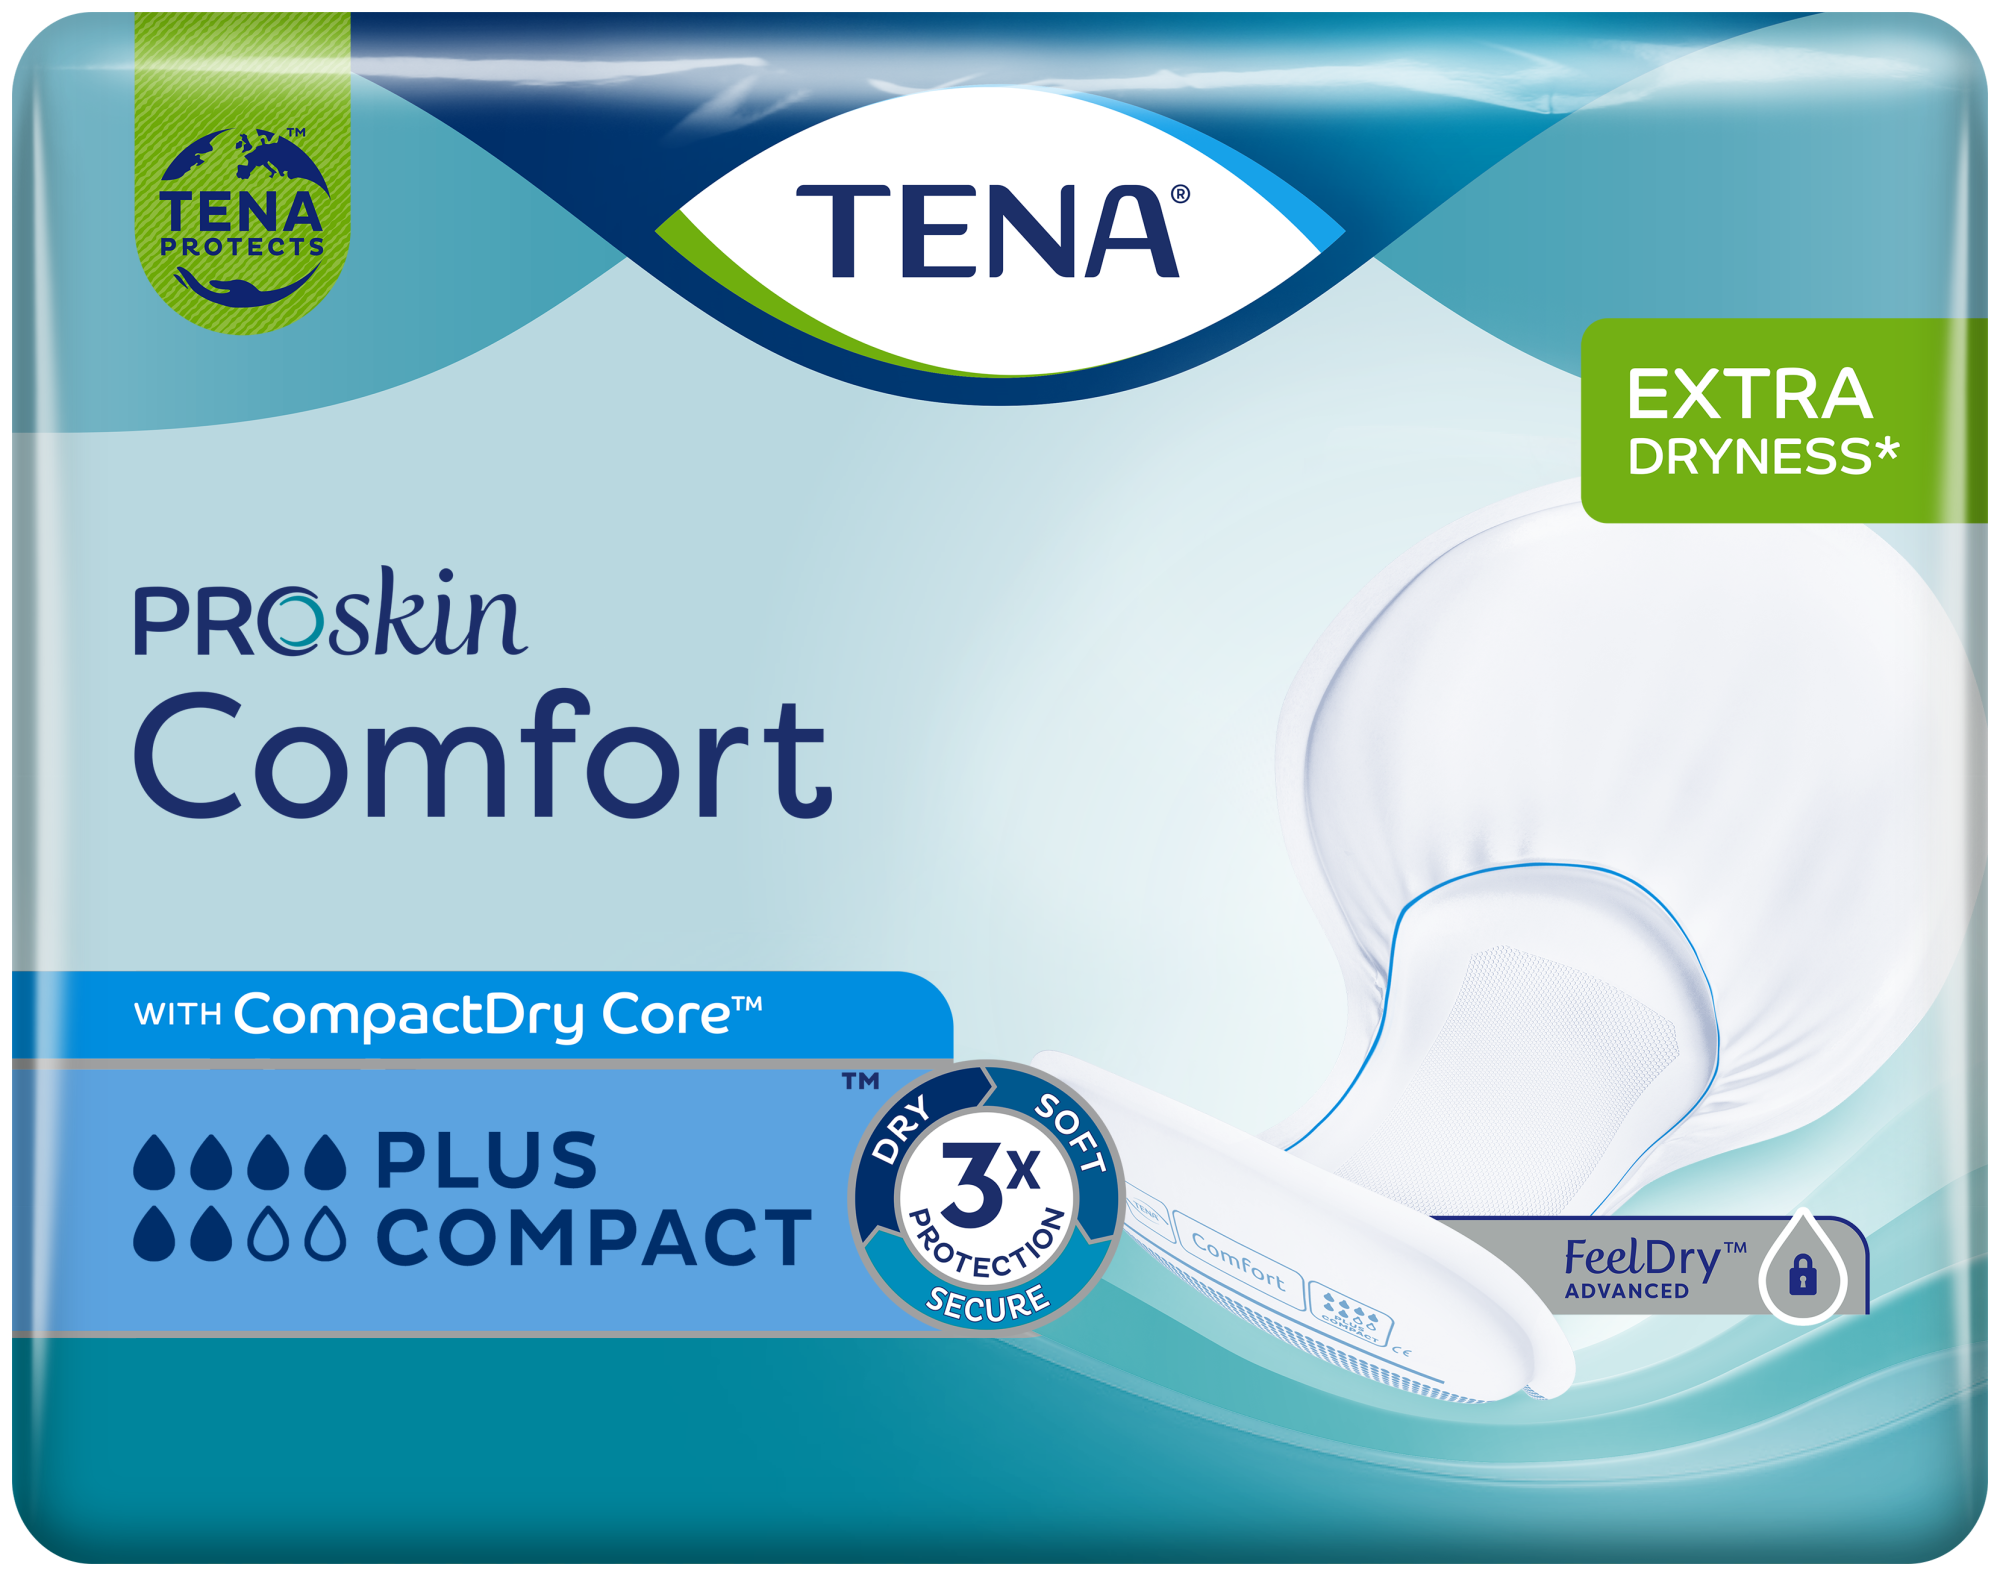 TENA ProSkin Comfort Plus Compact | Shaped incontinence pad